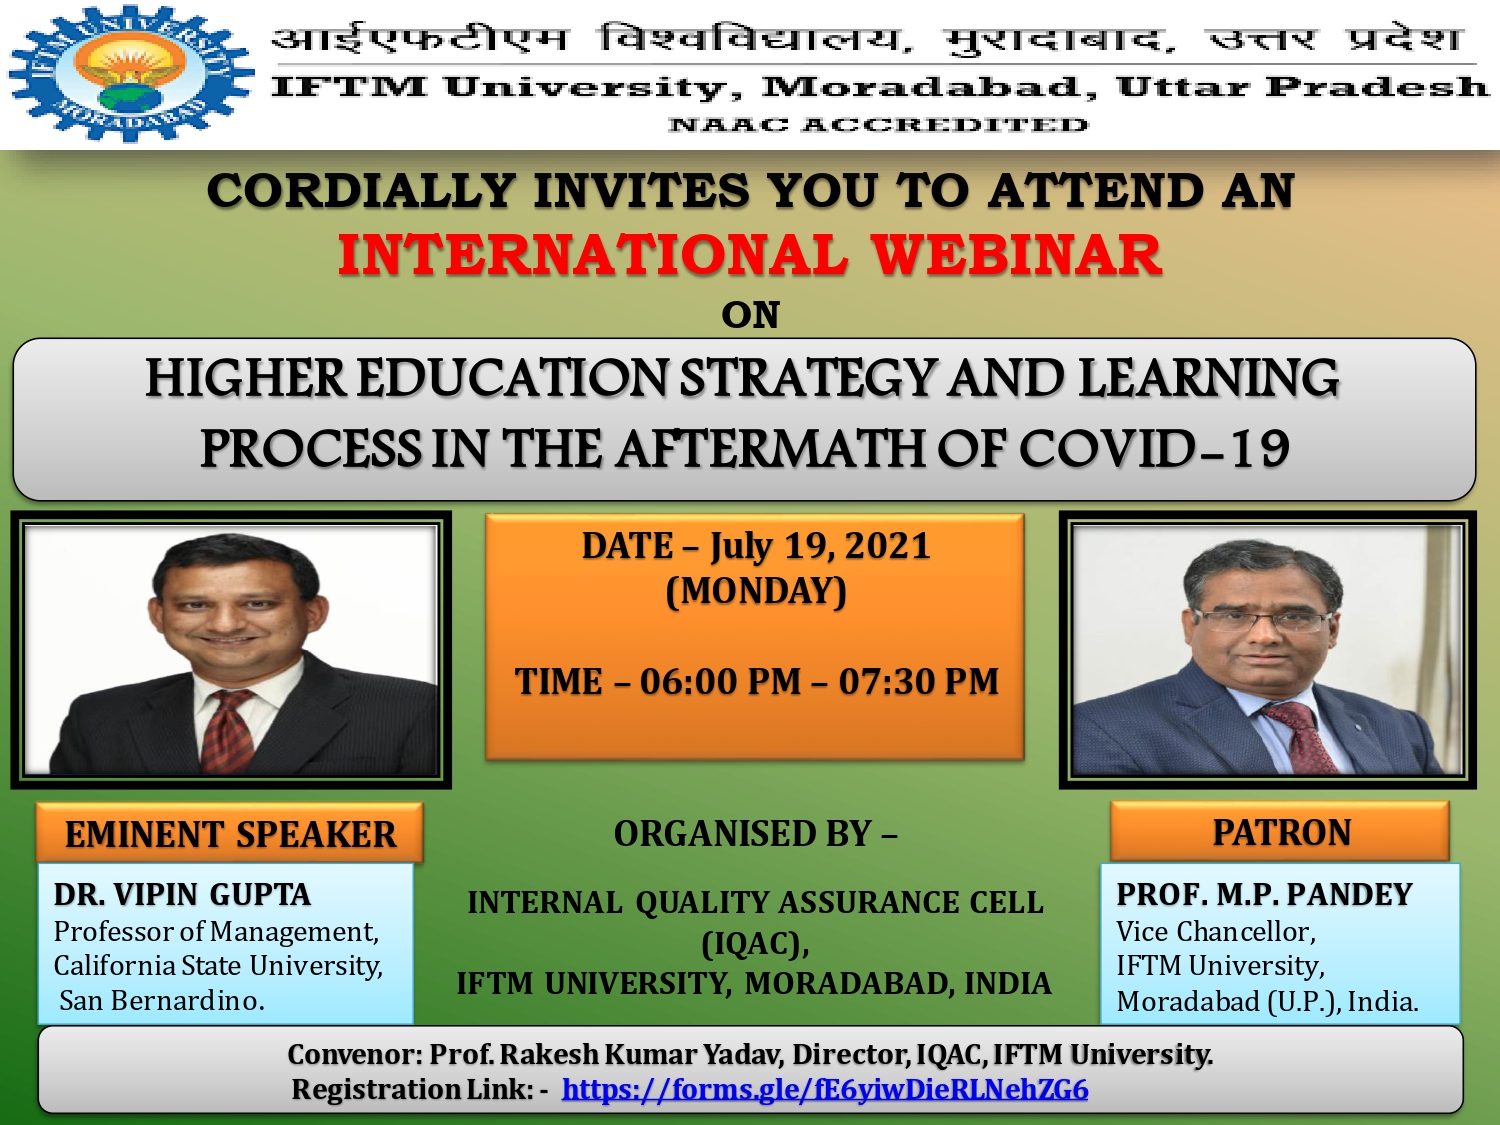 International Webinar on Higher Education Strategies and Learning Process Process in the Aftermath of Covid -19